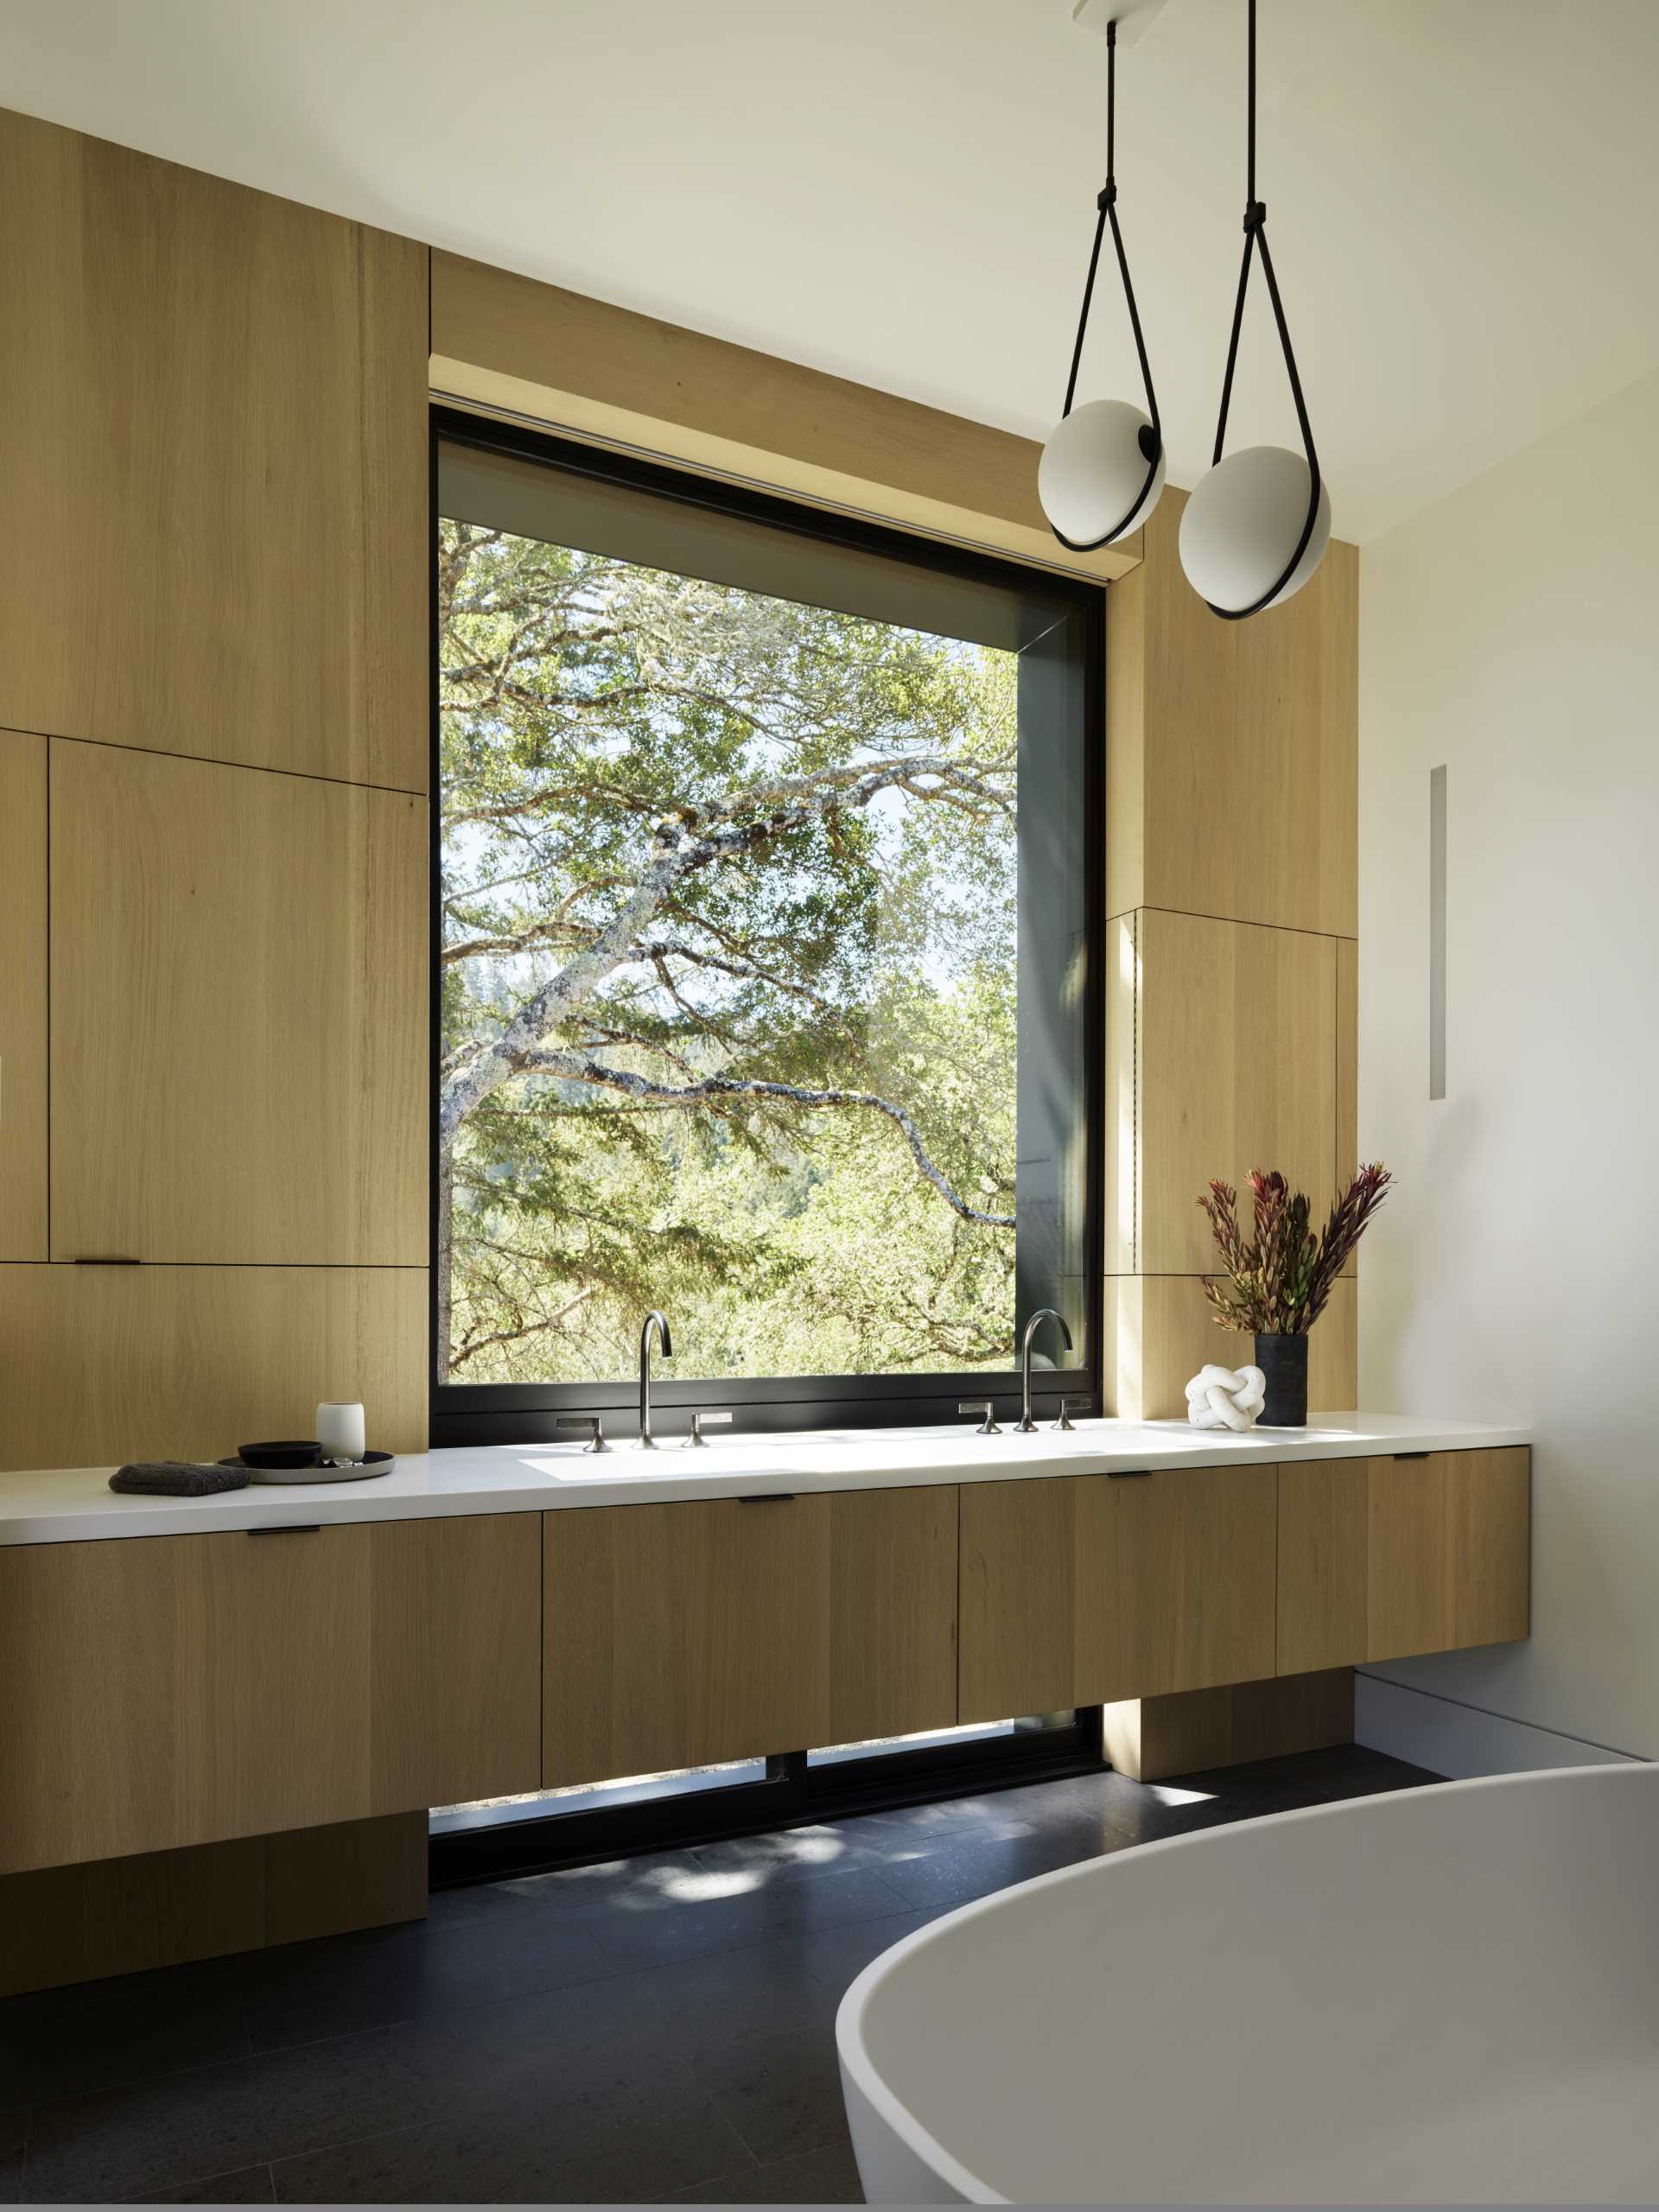 This ensuite bathroom features a wood vanity that runs the length of the wall, while a freestanding bathtub is positioned outside of the shower.